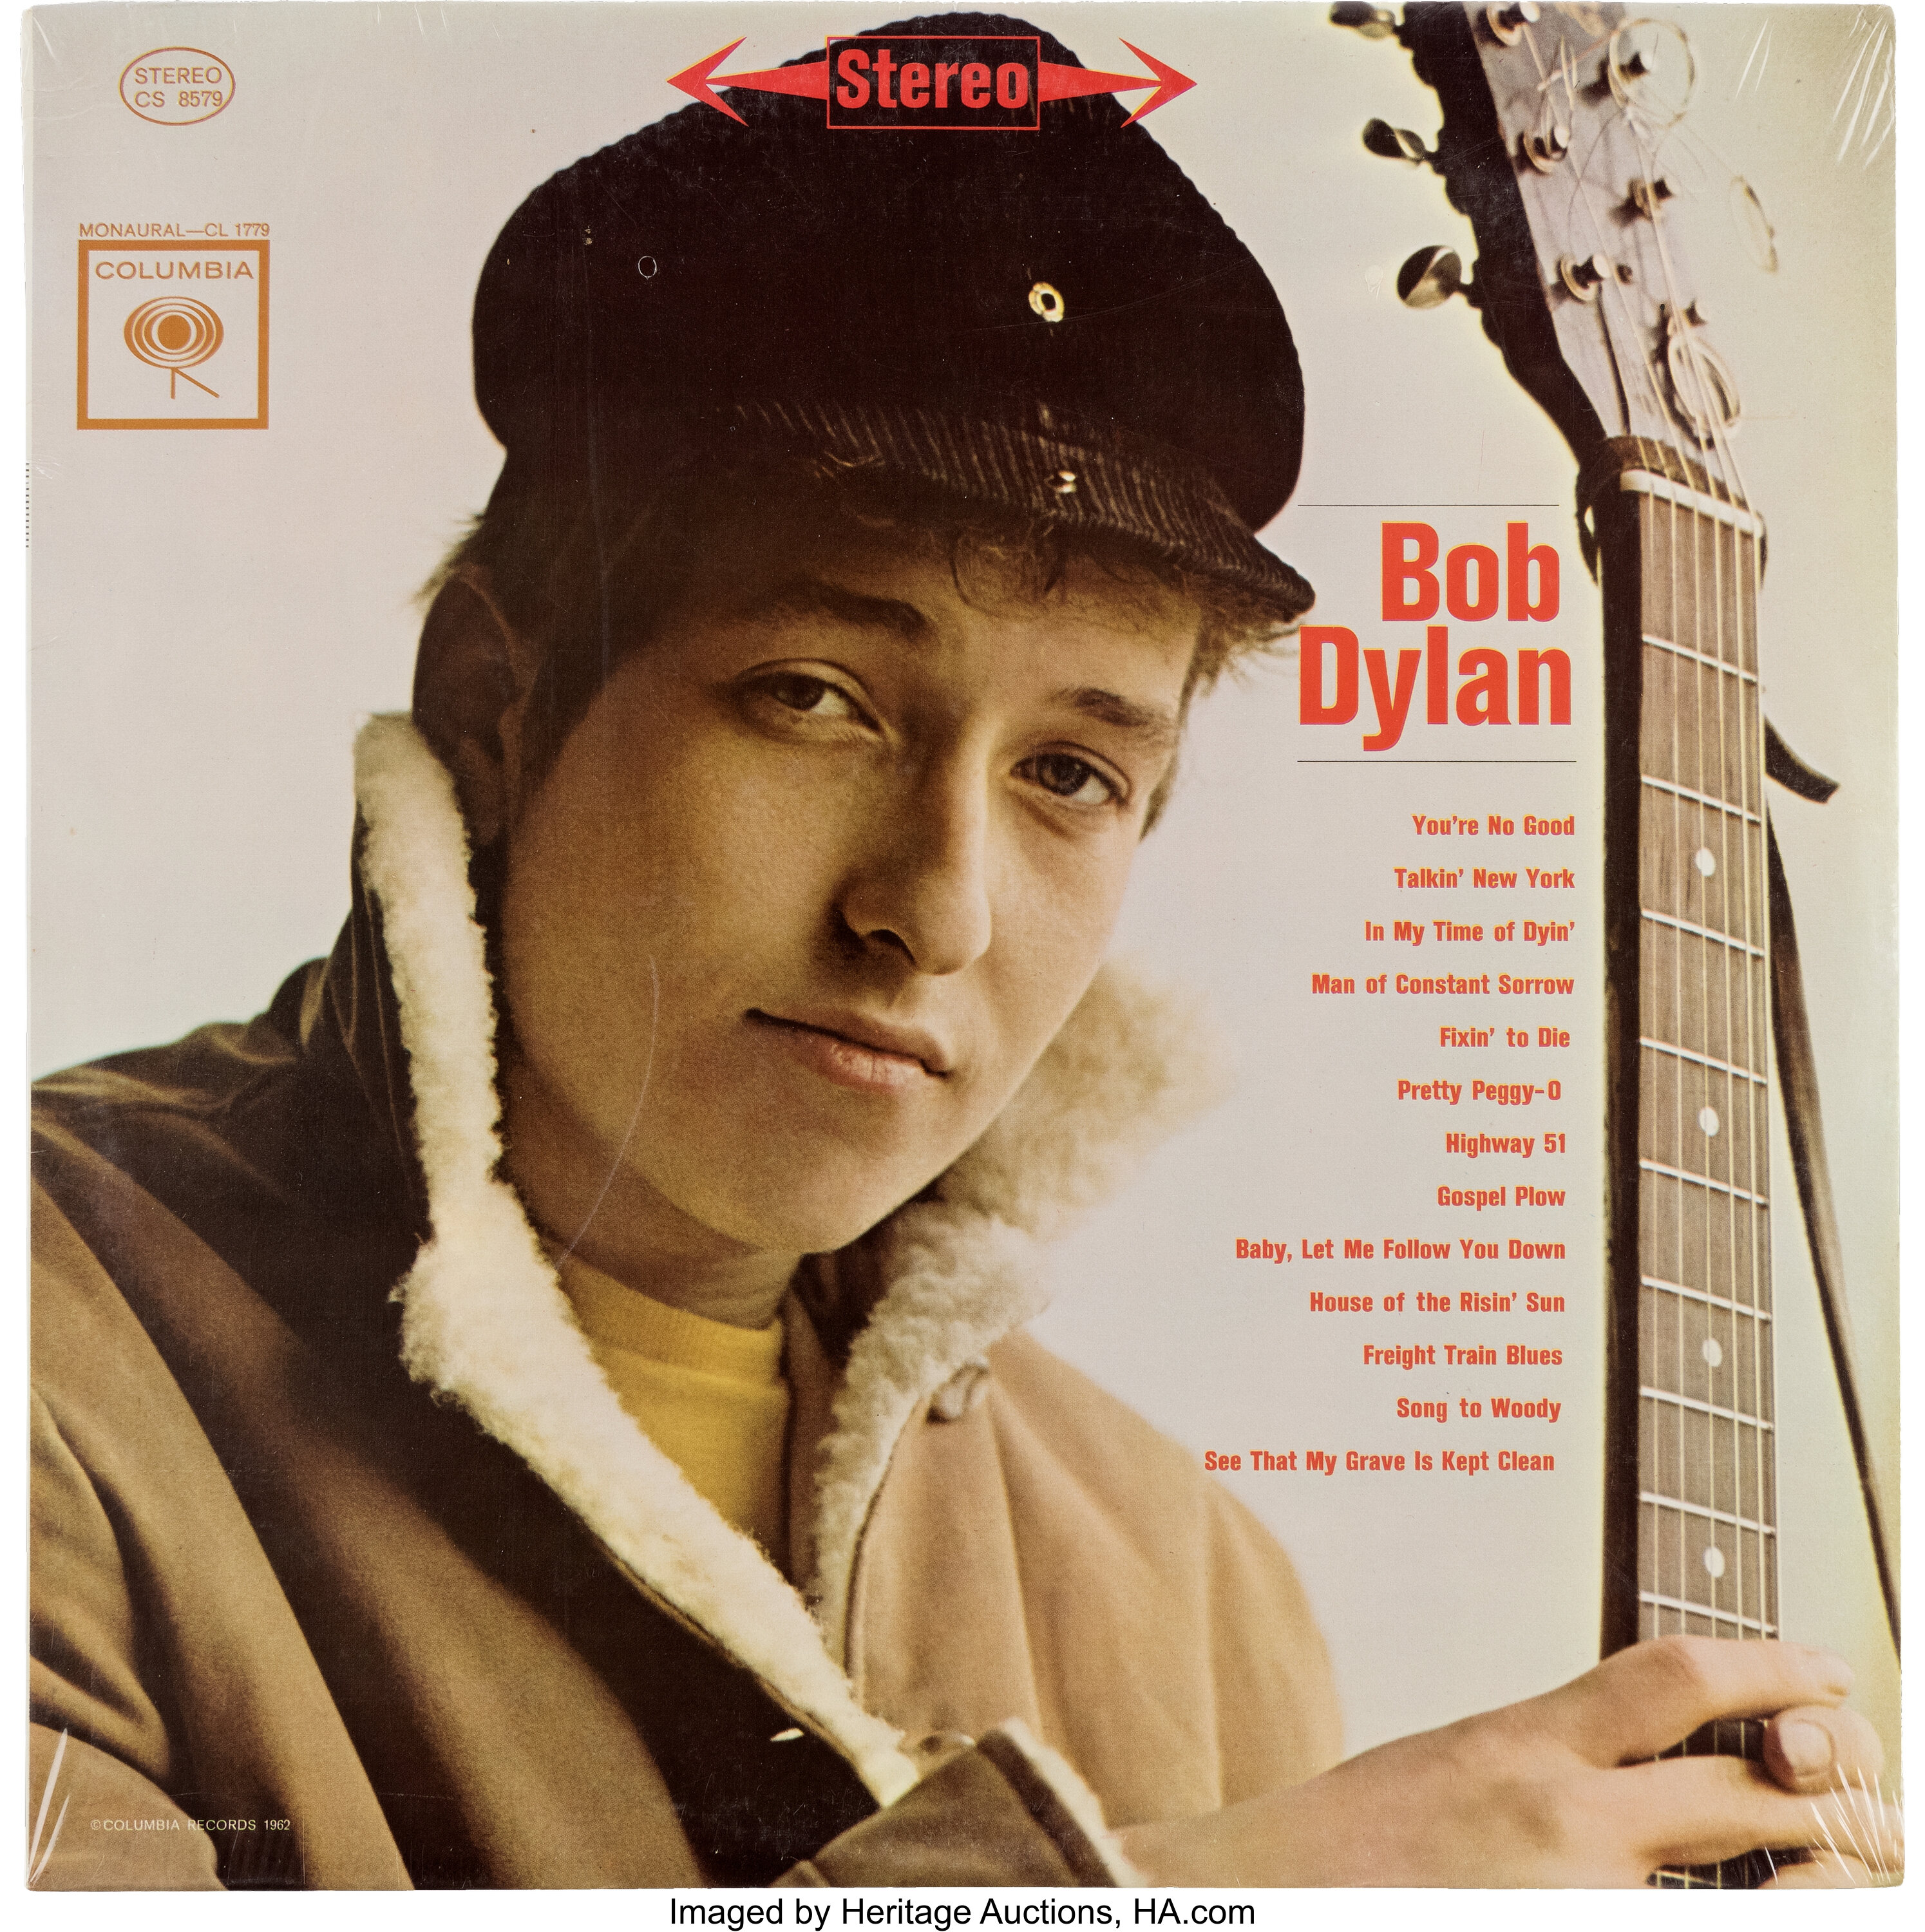 Bob Dylan 1962 First Album Stereo LP In Shrink Wrap